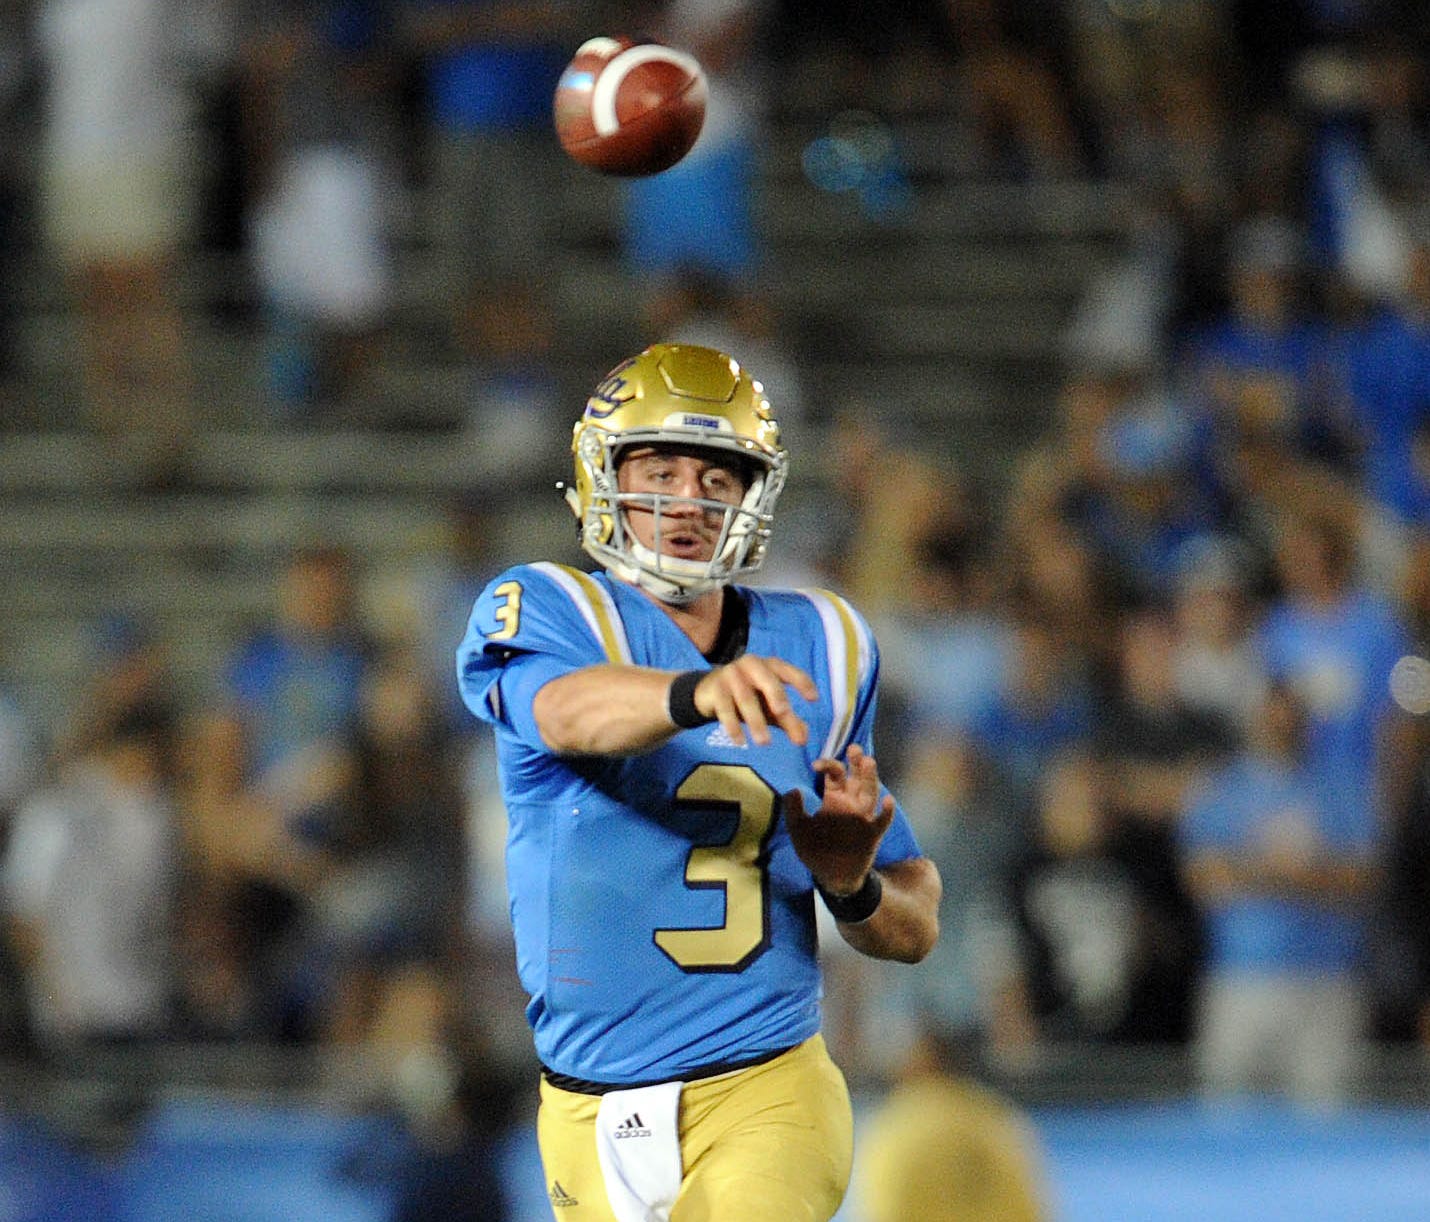 Bruins quarterback Josh Rosen would like schools to offer players more help.